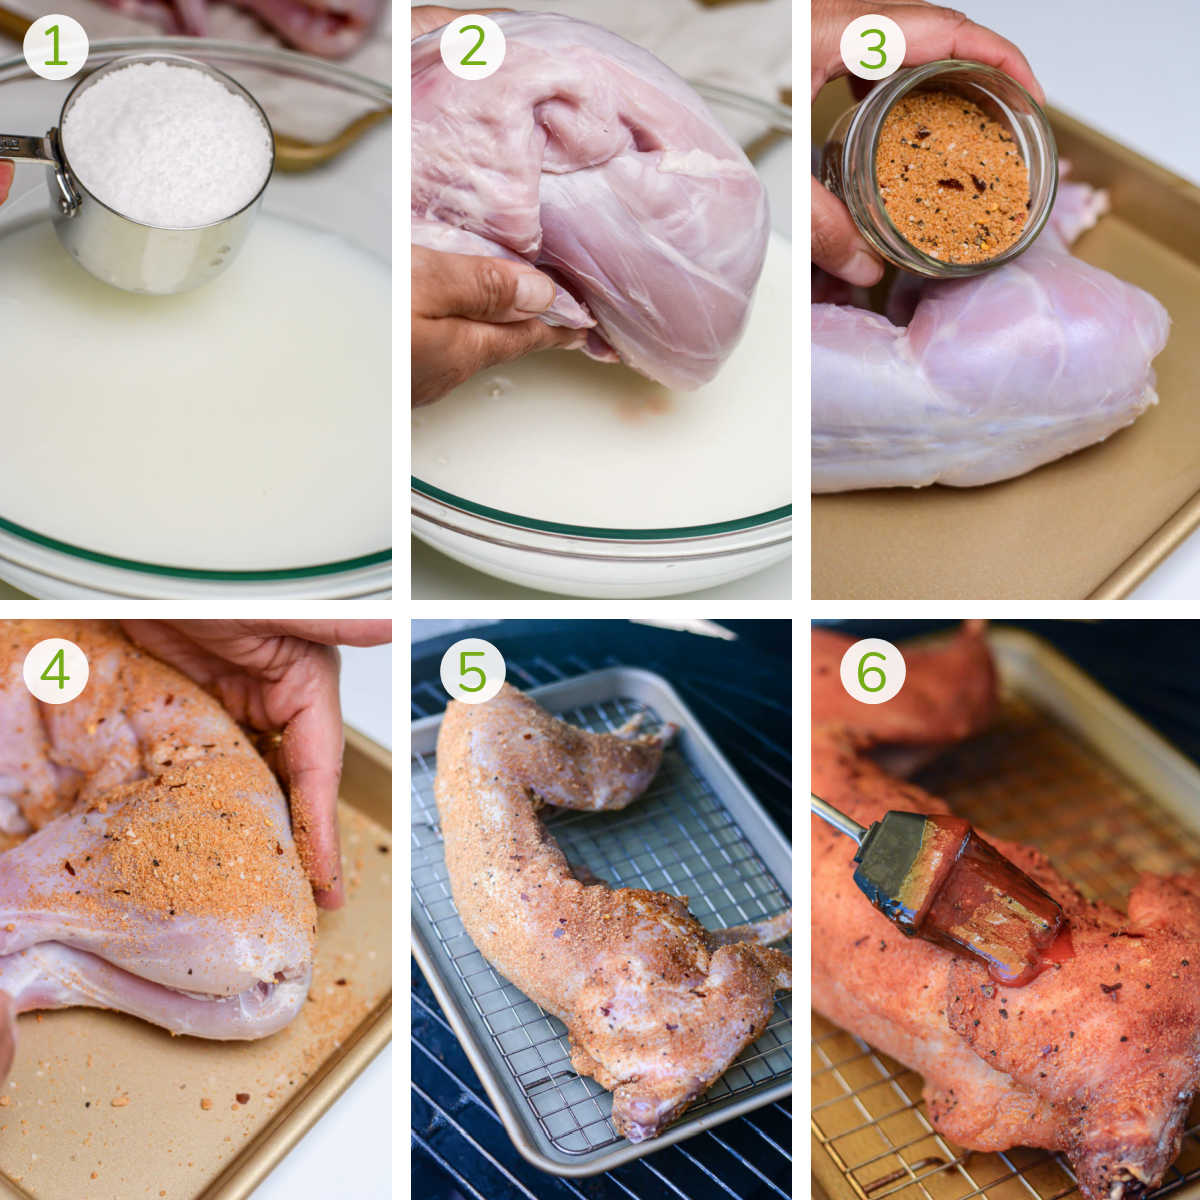 instruction photos showing making the buttermilk brine, adding the rabbit, drying and seasoning it, and then smoking with a nice BBQ sauce finish.